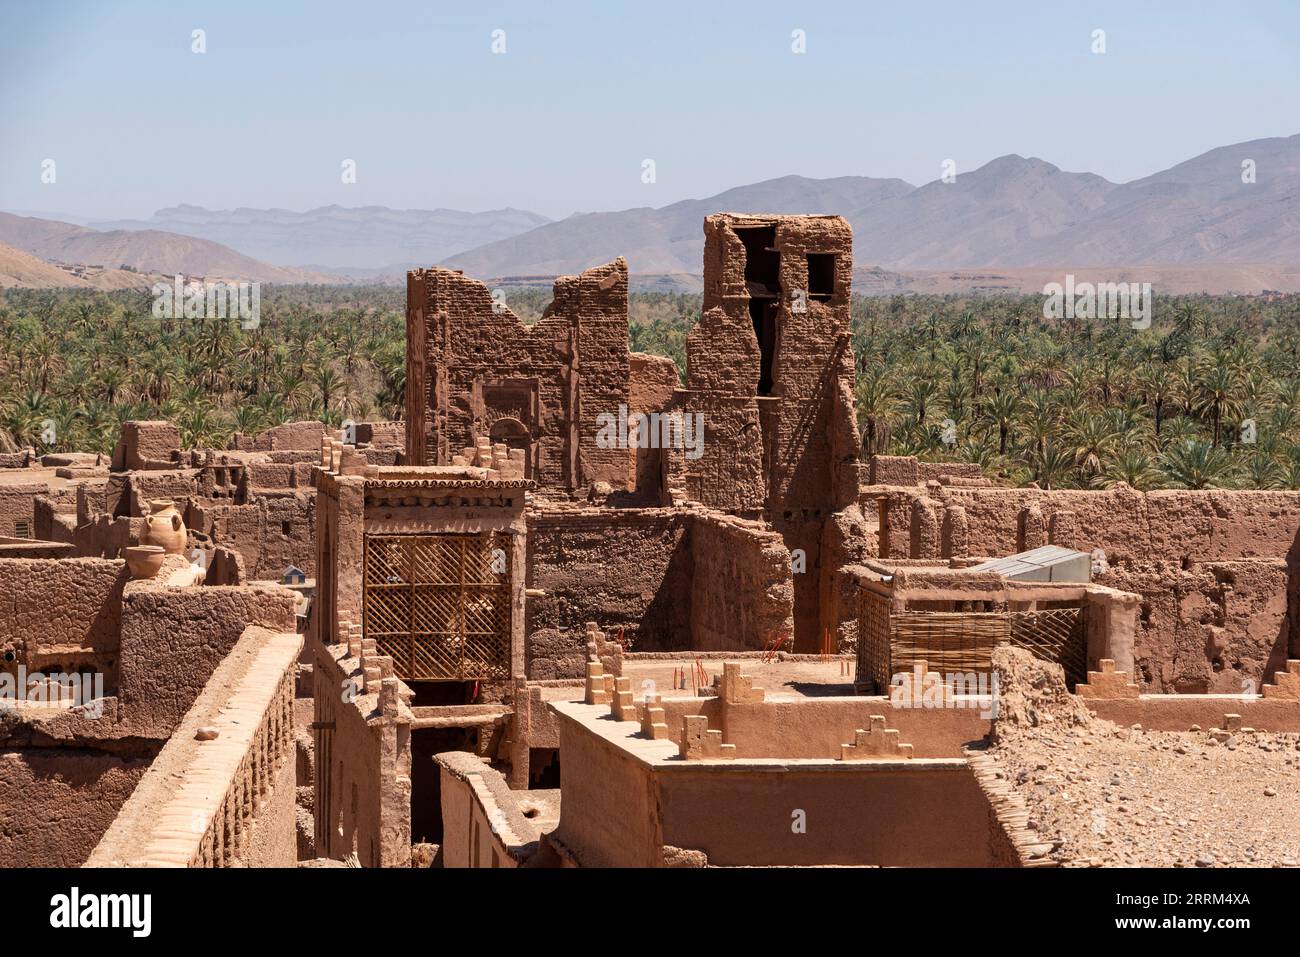 View over the roofs of Tamenougalt village with its typical clay houses, the Draa valley in the background, Morocco Stock Photo